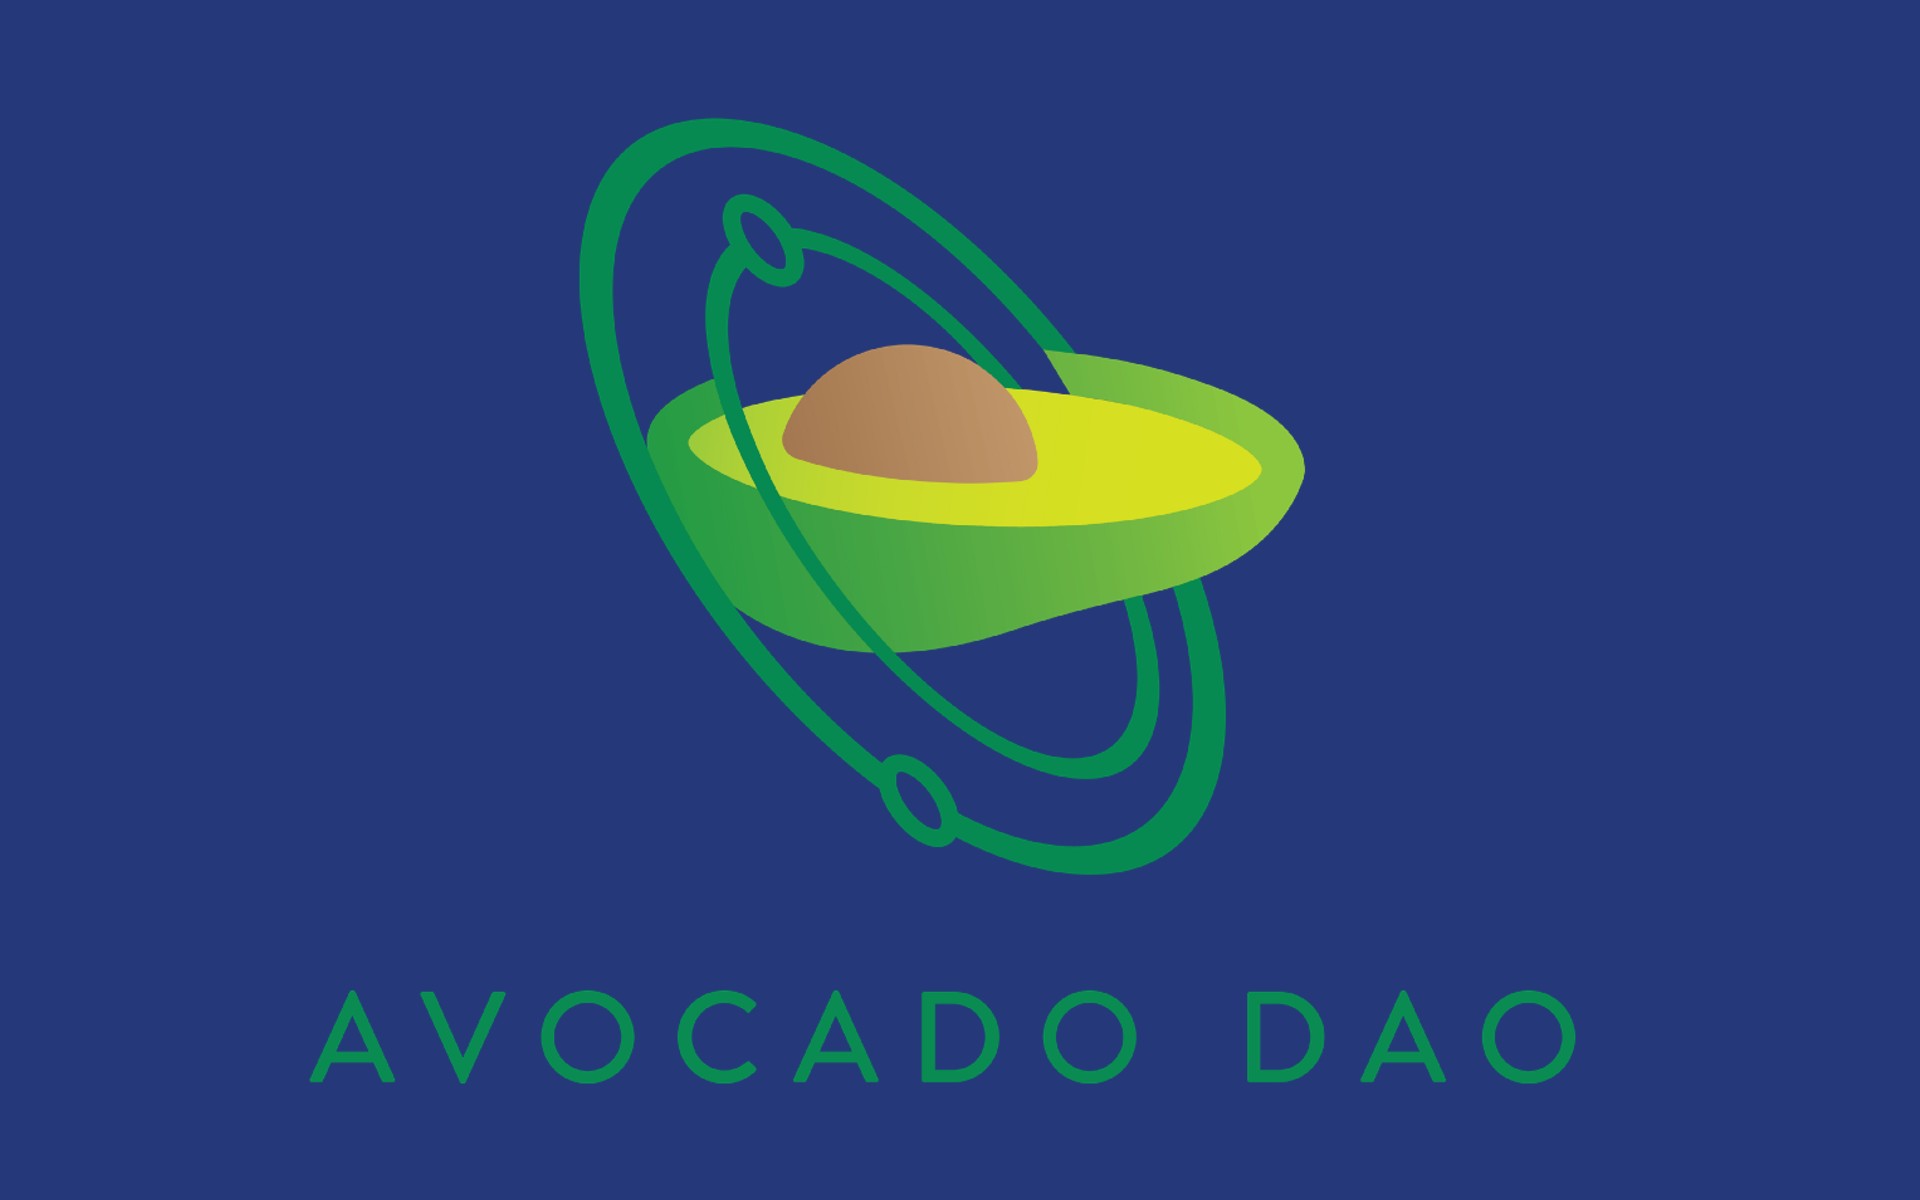 Avocado DAO Guide: How to Make Money, Pros, Cons, and Getting Started